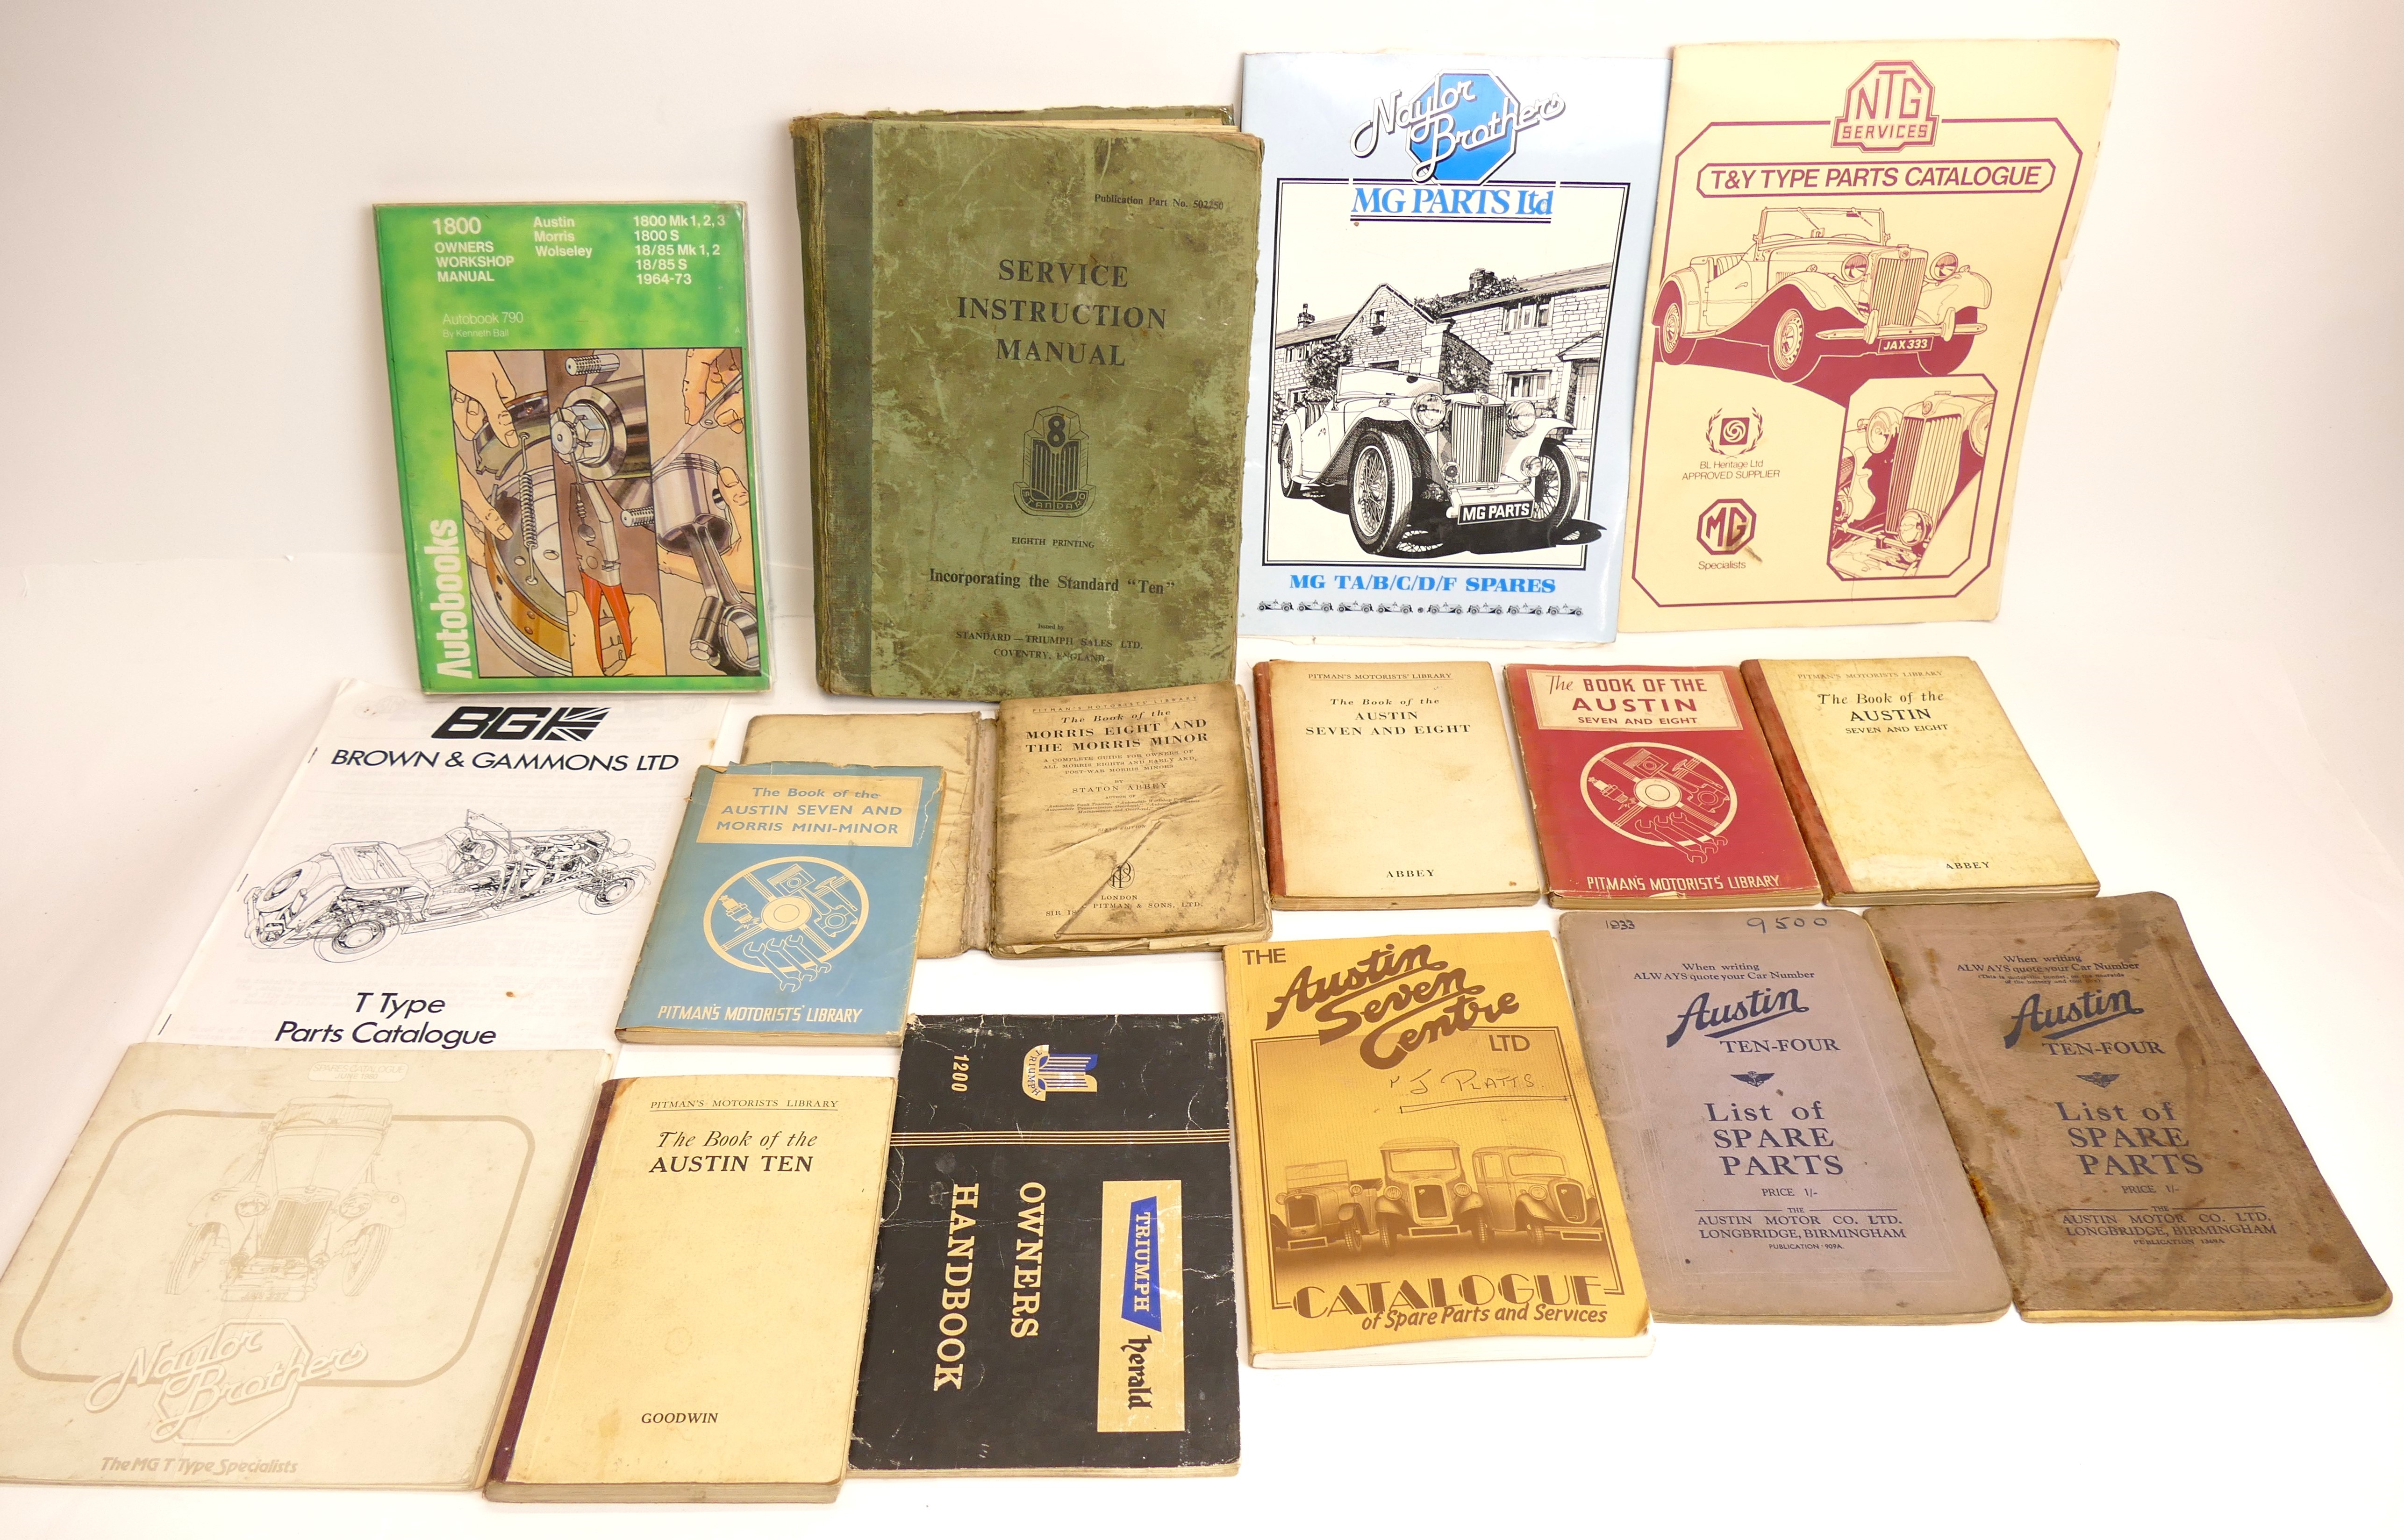 Quantity of parts catalogues and Pitman'